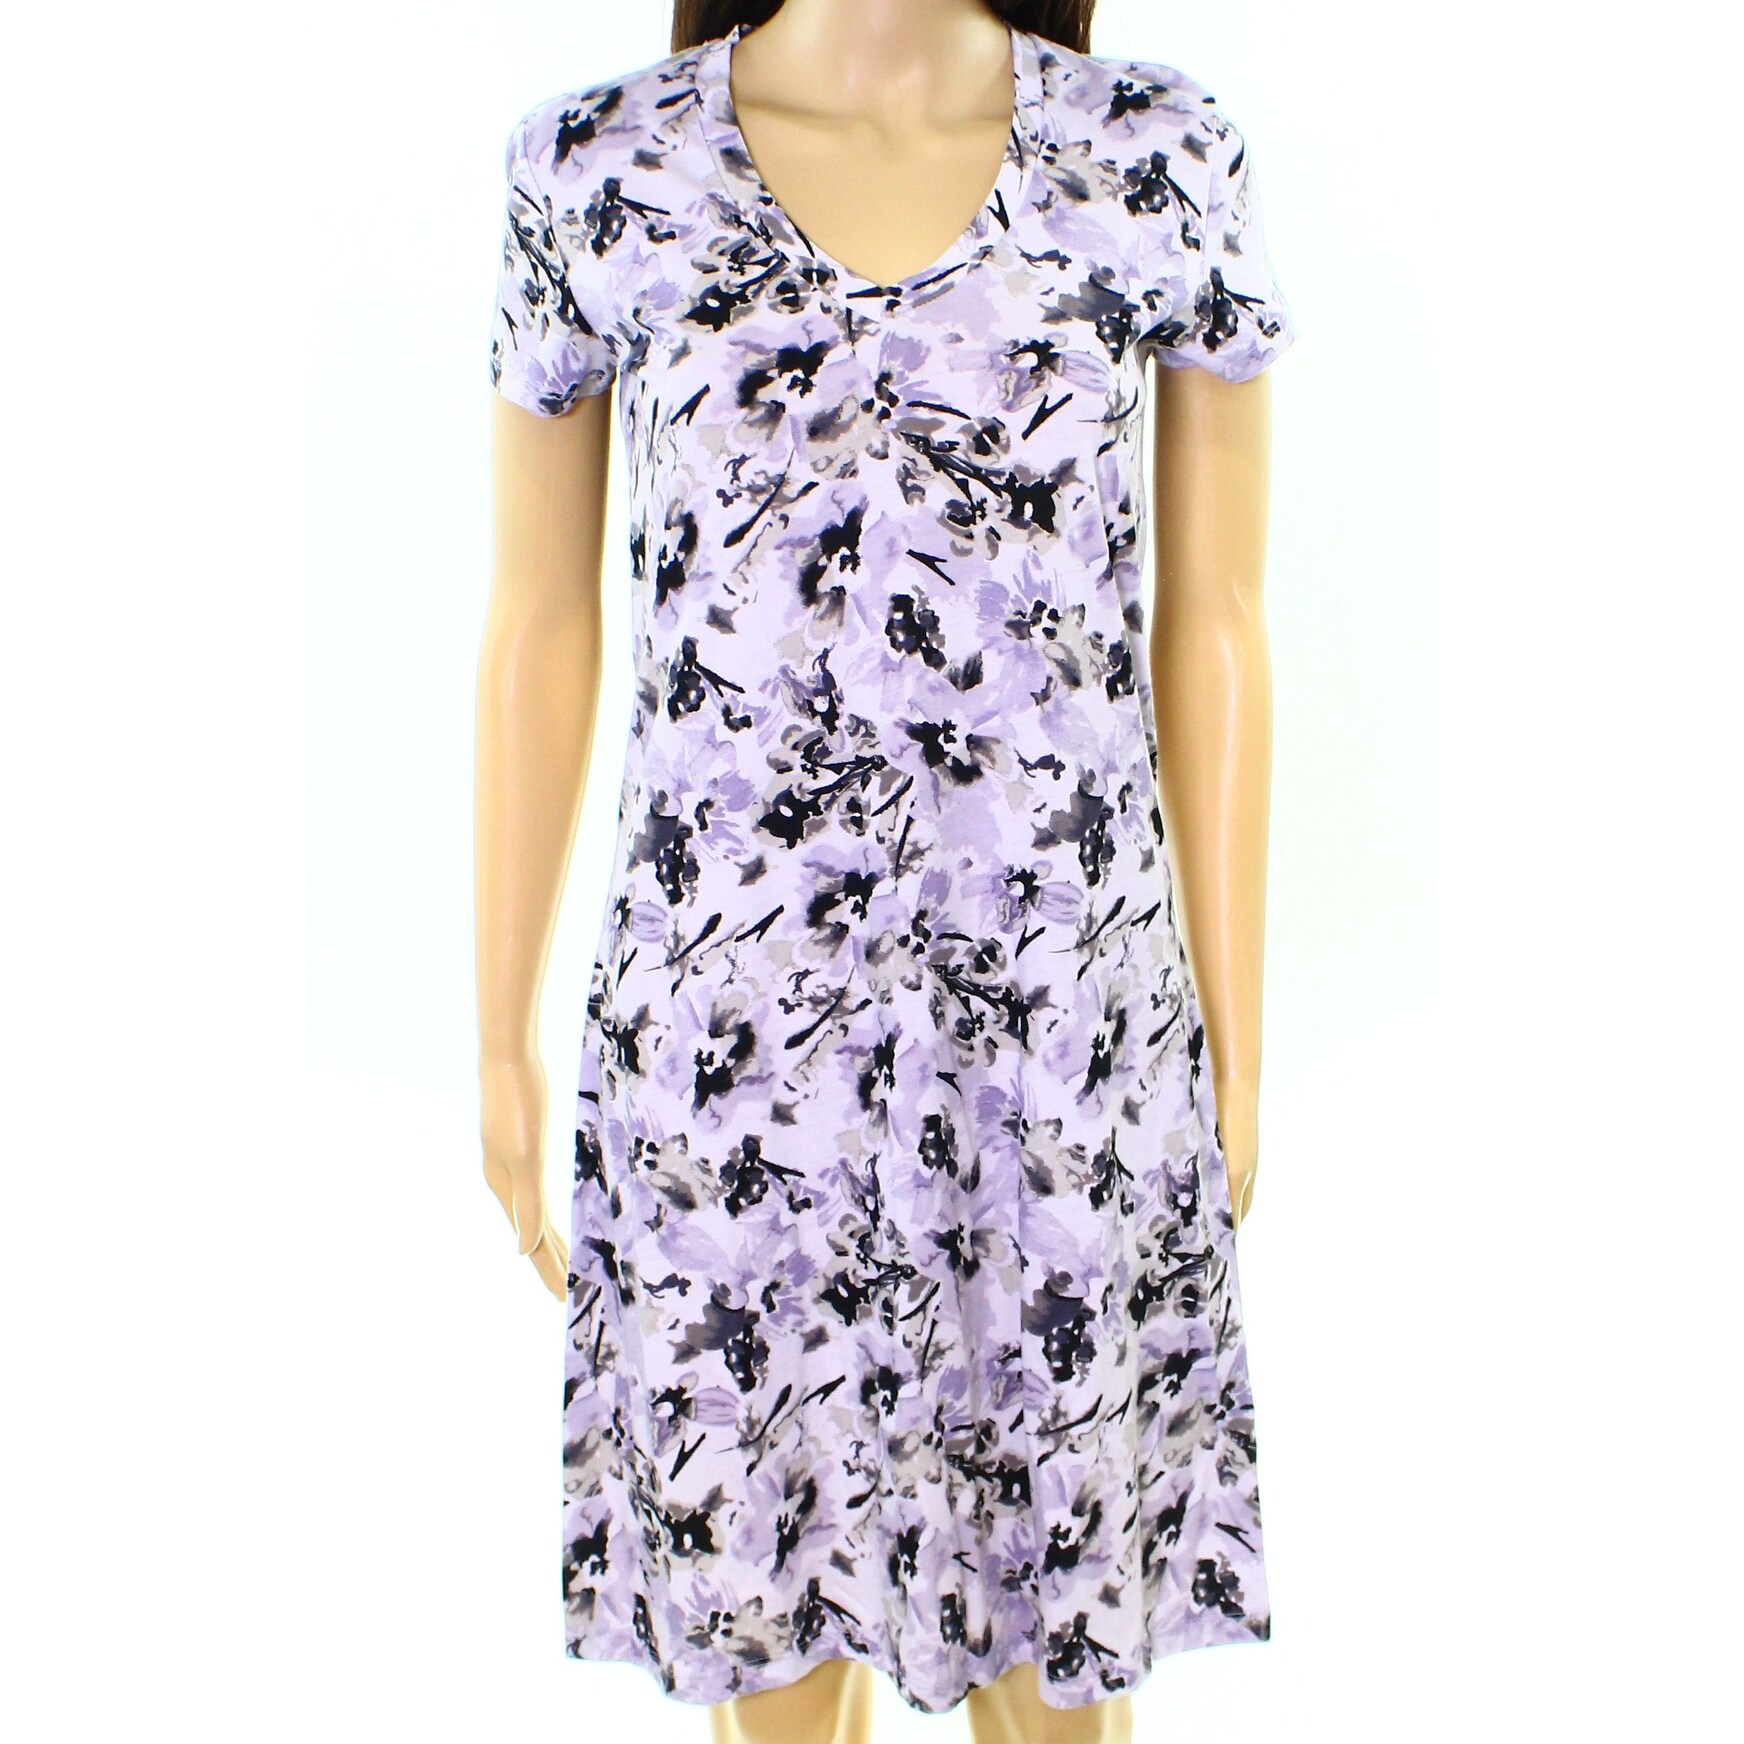 lord and taylor purple dress